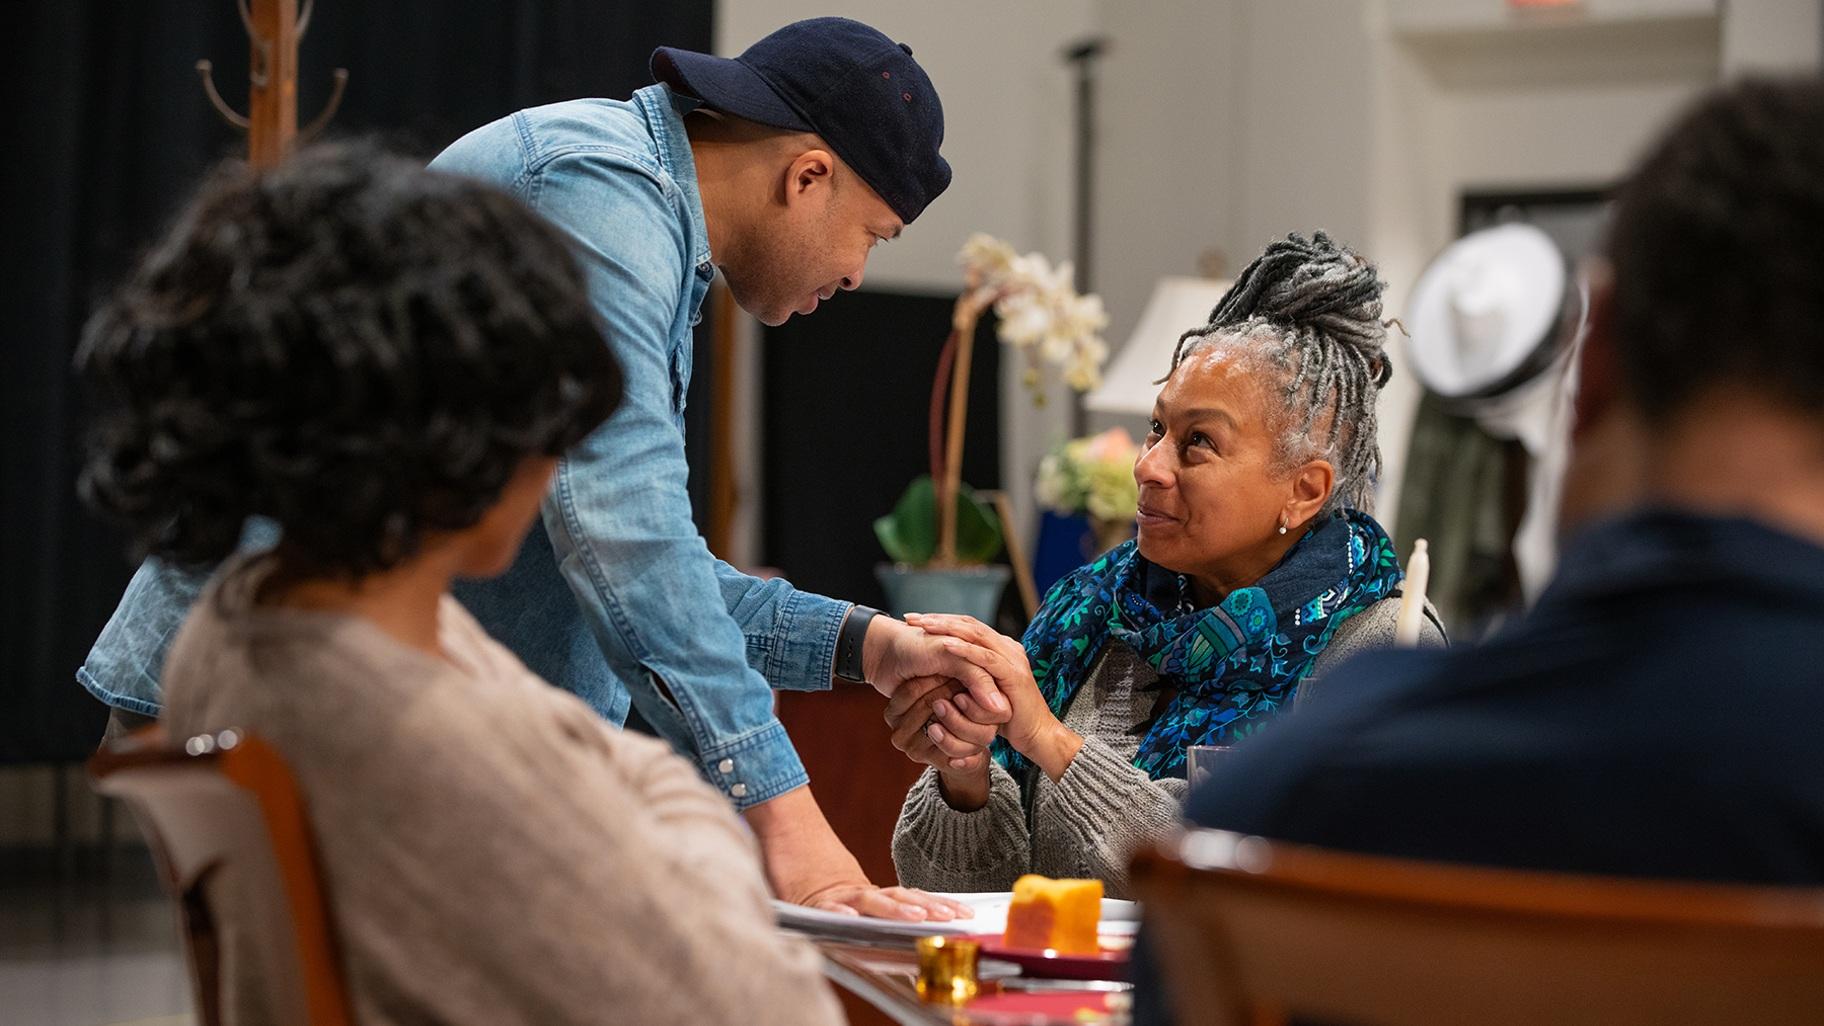 (left to right) Ensemble members Alana Arenas and Glenn Davis with Tamara Tunie and Harry Lennix in rehearsal for Steppenwolf Theatre’s world premiere of “Purpose.” (Joel Moorman)